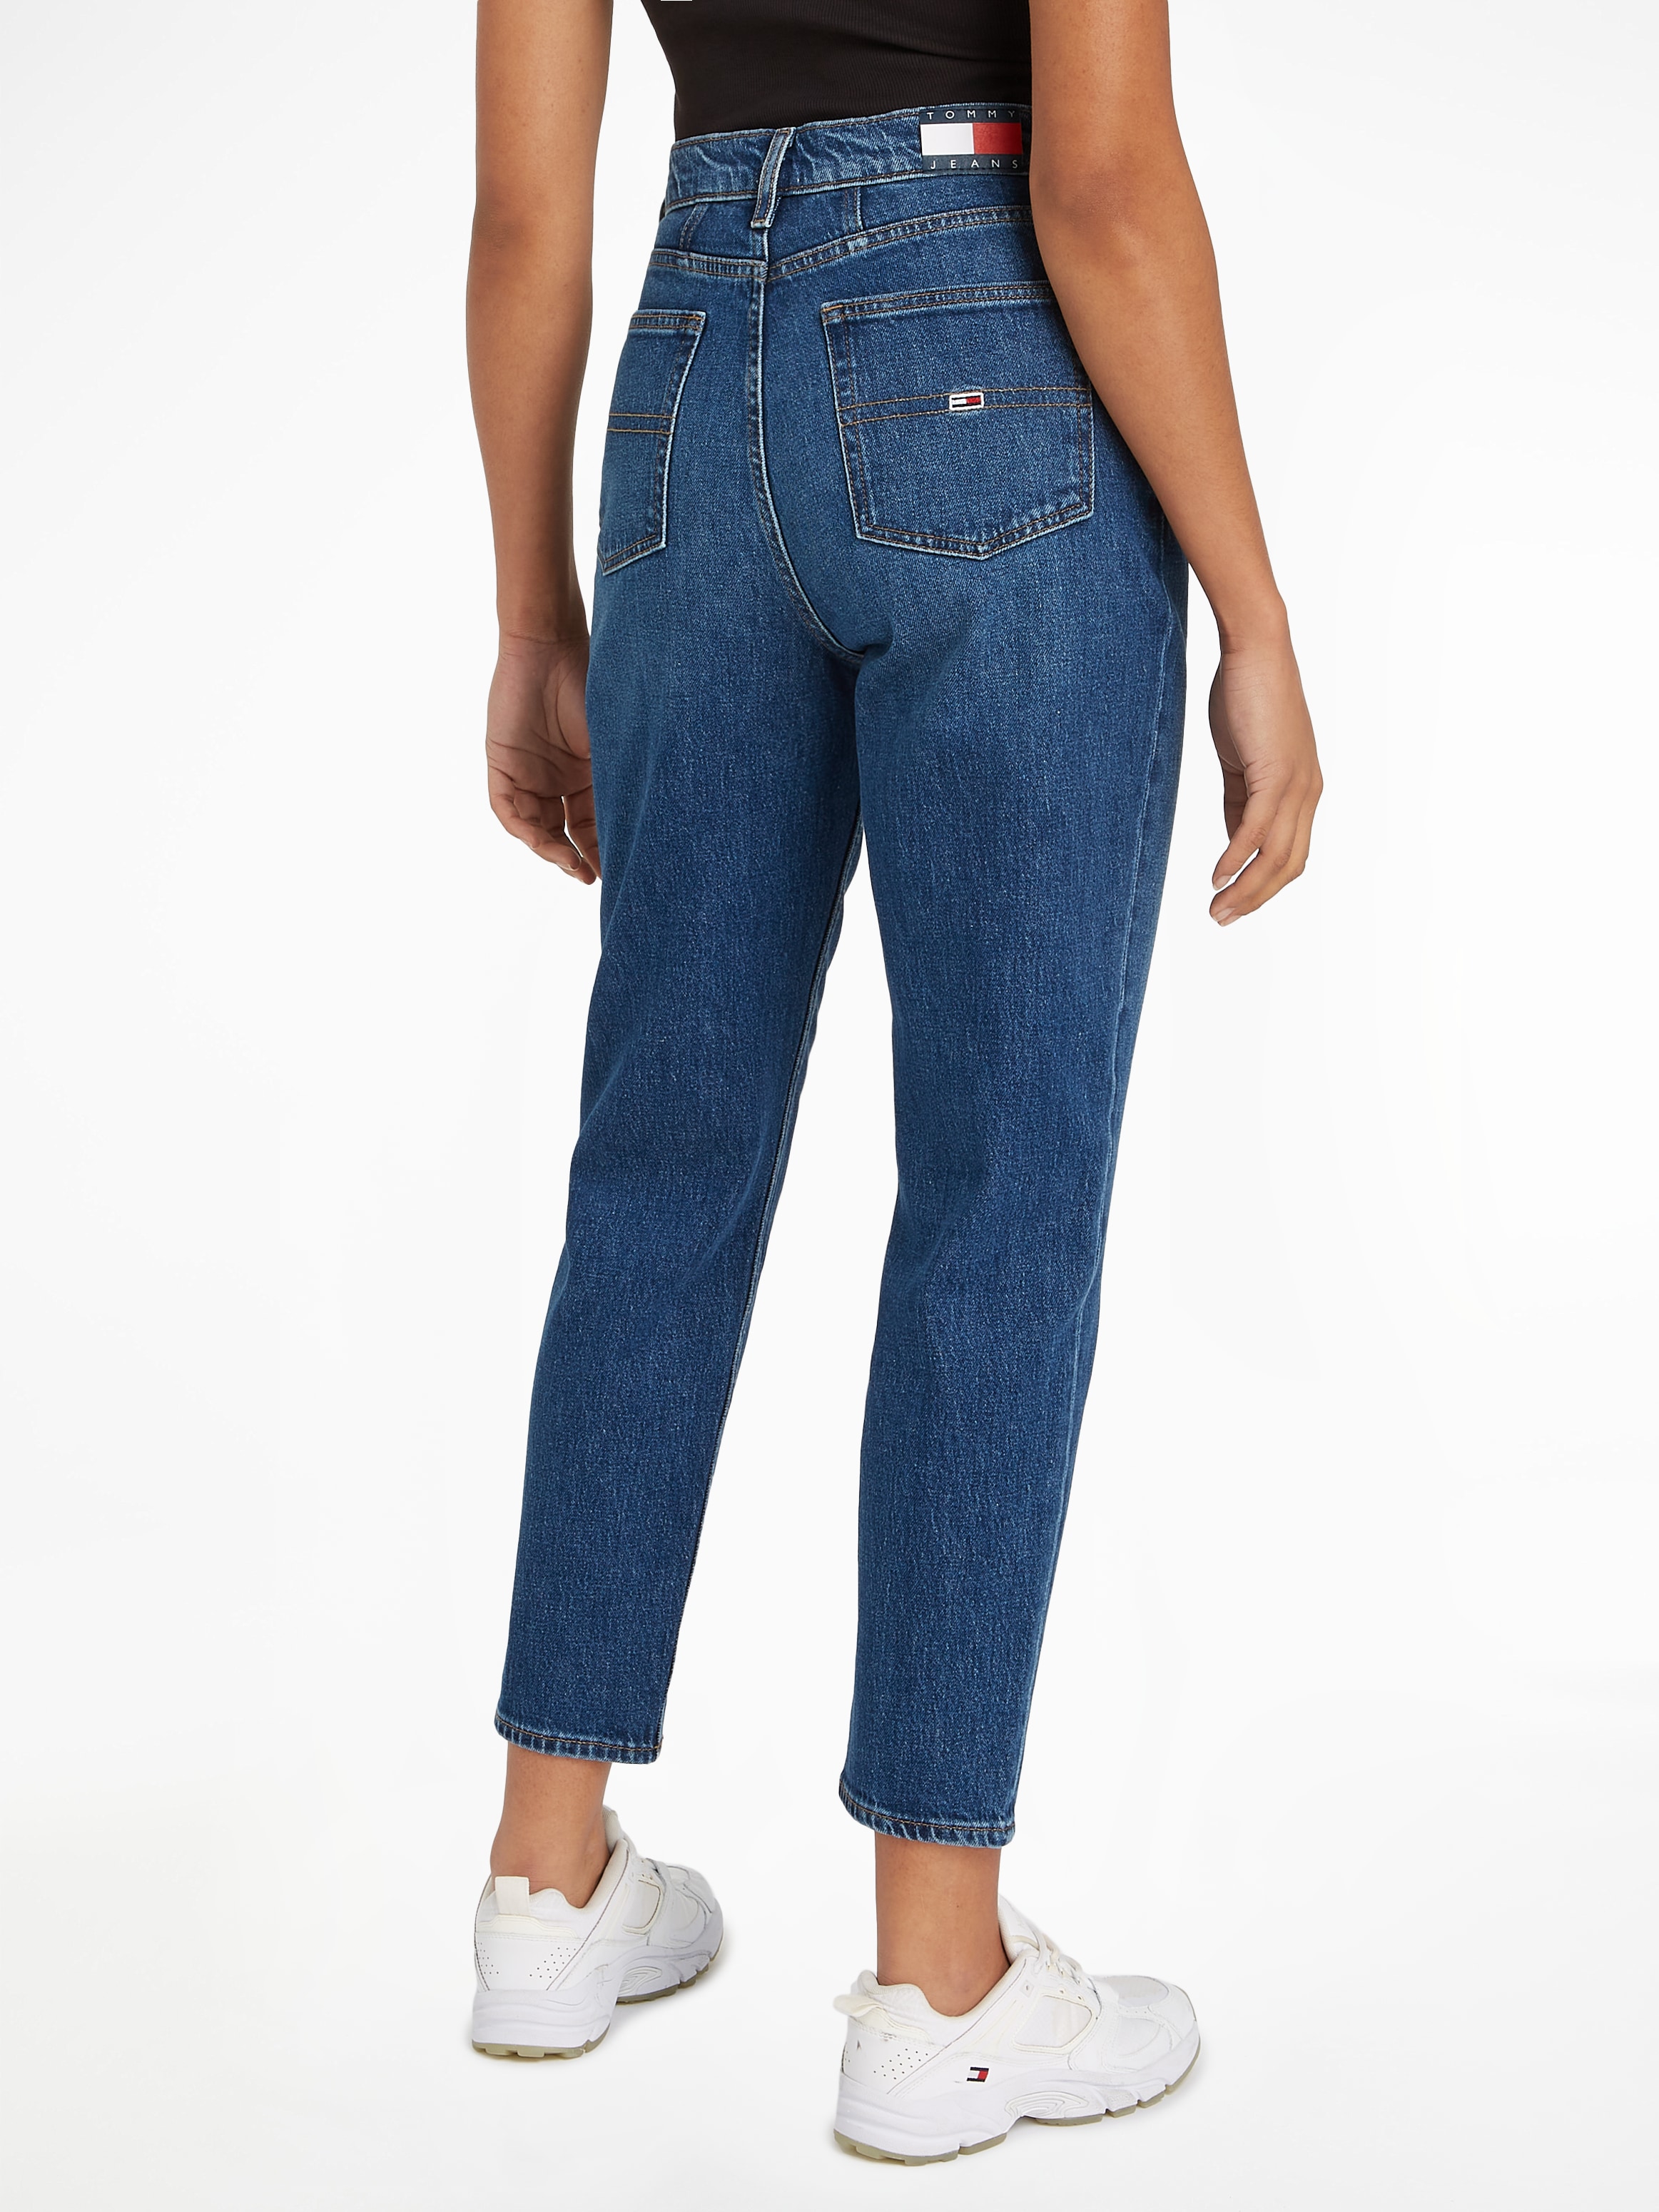 Tommy Jeans Mom-Jeans »Tommy Jeans - High waist - Mom-Jeans«, Mom Jeans mit hoher Taille und Tommy Jeans Logo-Badge